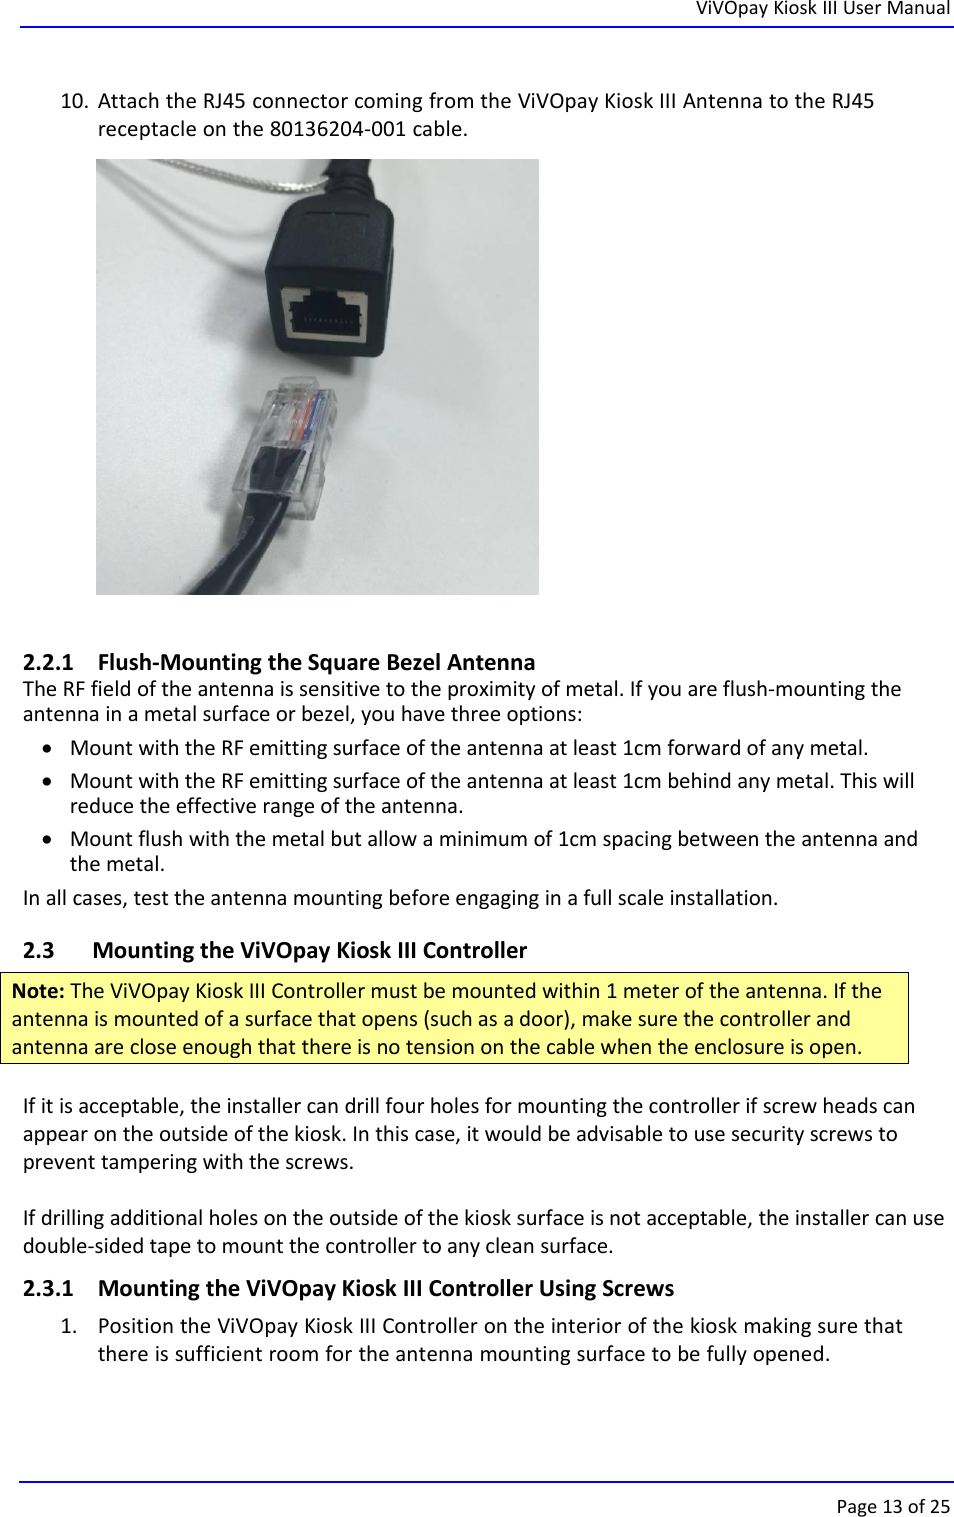 ViVOpay Kiosk III User ManualPage 13 of 2510. Attach the RJ45 connector coming from the ViVOpay Kiosk III Antenna to the RJ45receptacle on the 80136204-001 cable.2.2.1 Flush-Mounting the Square Bezel AntennaThe RF field of the antenna is sensitive to the proximity of metal. If you are flush-mounting theantenna in a metal surface or bezel, you have three options:Mount with the RF emitting surface of the antenna at least 1cm forward of any metal.Mount with the RF emitting surface of the antenna at least 1cm behind any metal. This willreduce the effective range of the antenna.Mount flush with the metal but allow a minimum of 1cm spacing between the antenna andthe metal.In all cases, test the antenna mounting before engaging in a full scale installation.2.3 Mounting the ViVOpay Kiosk III ControllerNote: The ViVOpay Kiosk III Controller must be mounted within 1 meter of the antenna. If theantenna is mounted of a surface that opens (such as a door), make sure the controller andantenna are close enough that there is no tension on the cable when the enclosure is open.If it is acceptable, the installer can drill four holes for mounting the controller if screw heads canappear on the outside of the kiosk. In this case, it would be advisable to use security screws toprevent tampering with the screws.If drilling additional holes on the outside of the kiosk surface is not acceptable, the installer can usedouble-sided tape to mount the controller to any clean surface.2.3.1 Mounting the ViVOpay Kiosk III Controller Using Screws1. Position the ViVOpay Kiosk III Controller on the interior of the kiosk making sure thatthere is sufficient room for the antenna mounting surface to be fully opened.